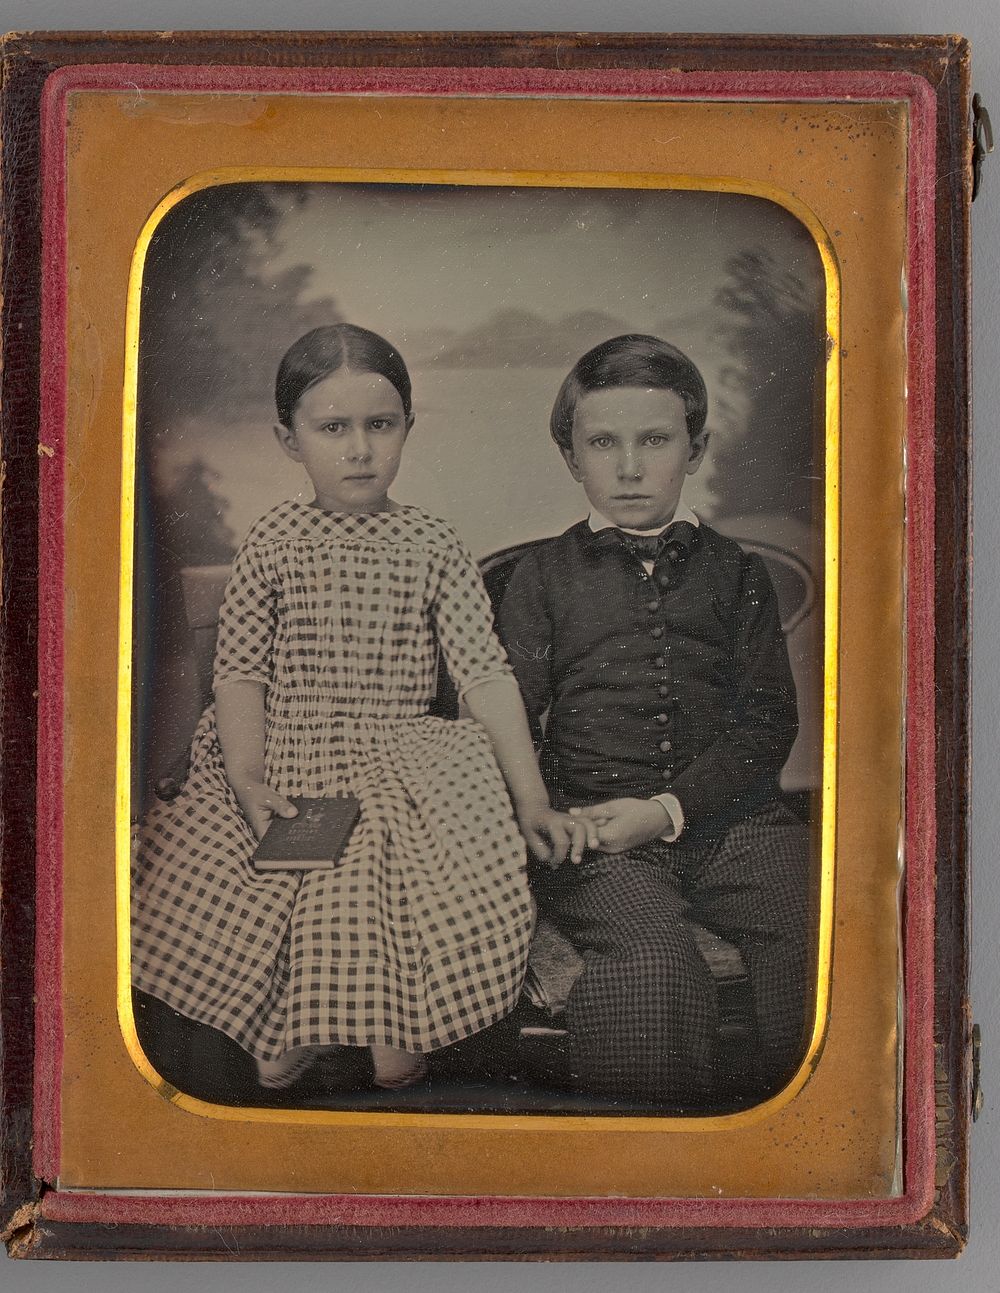 Untitled (Portrait of a Girl and a Boy) by Samuel Broadbent